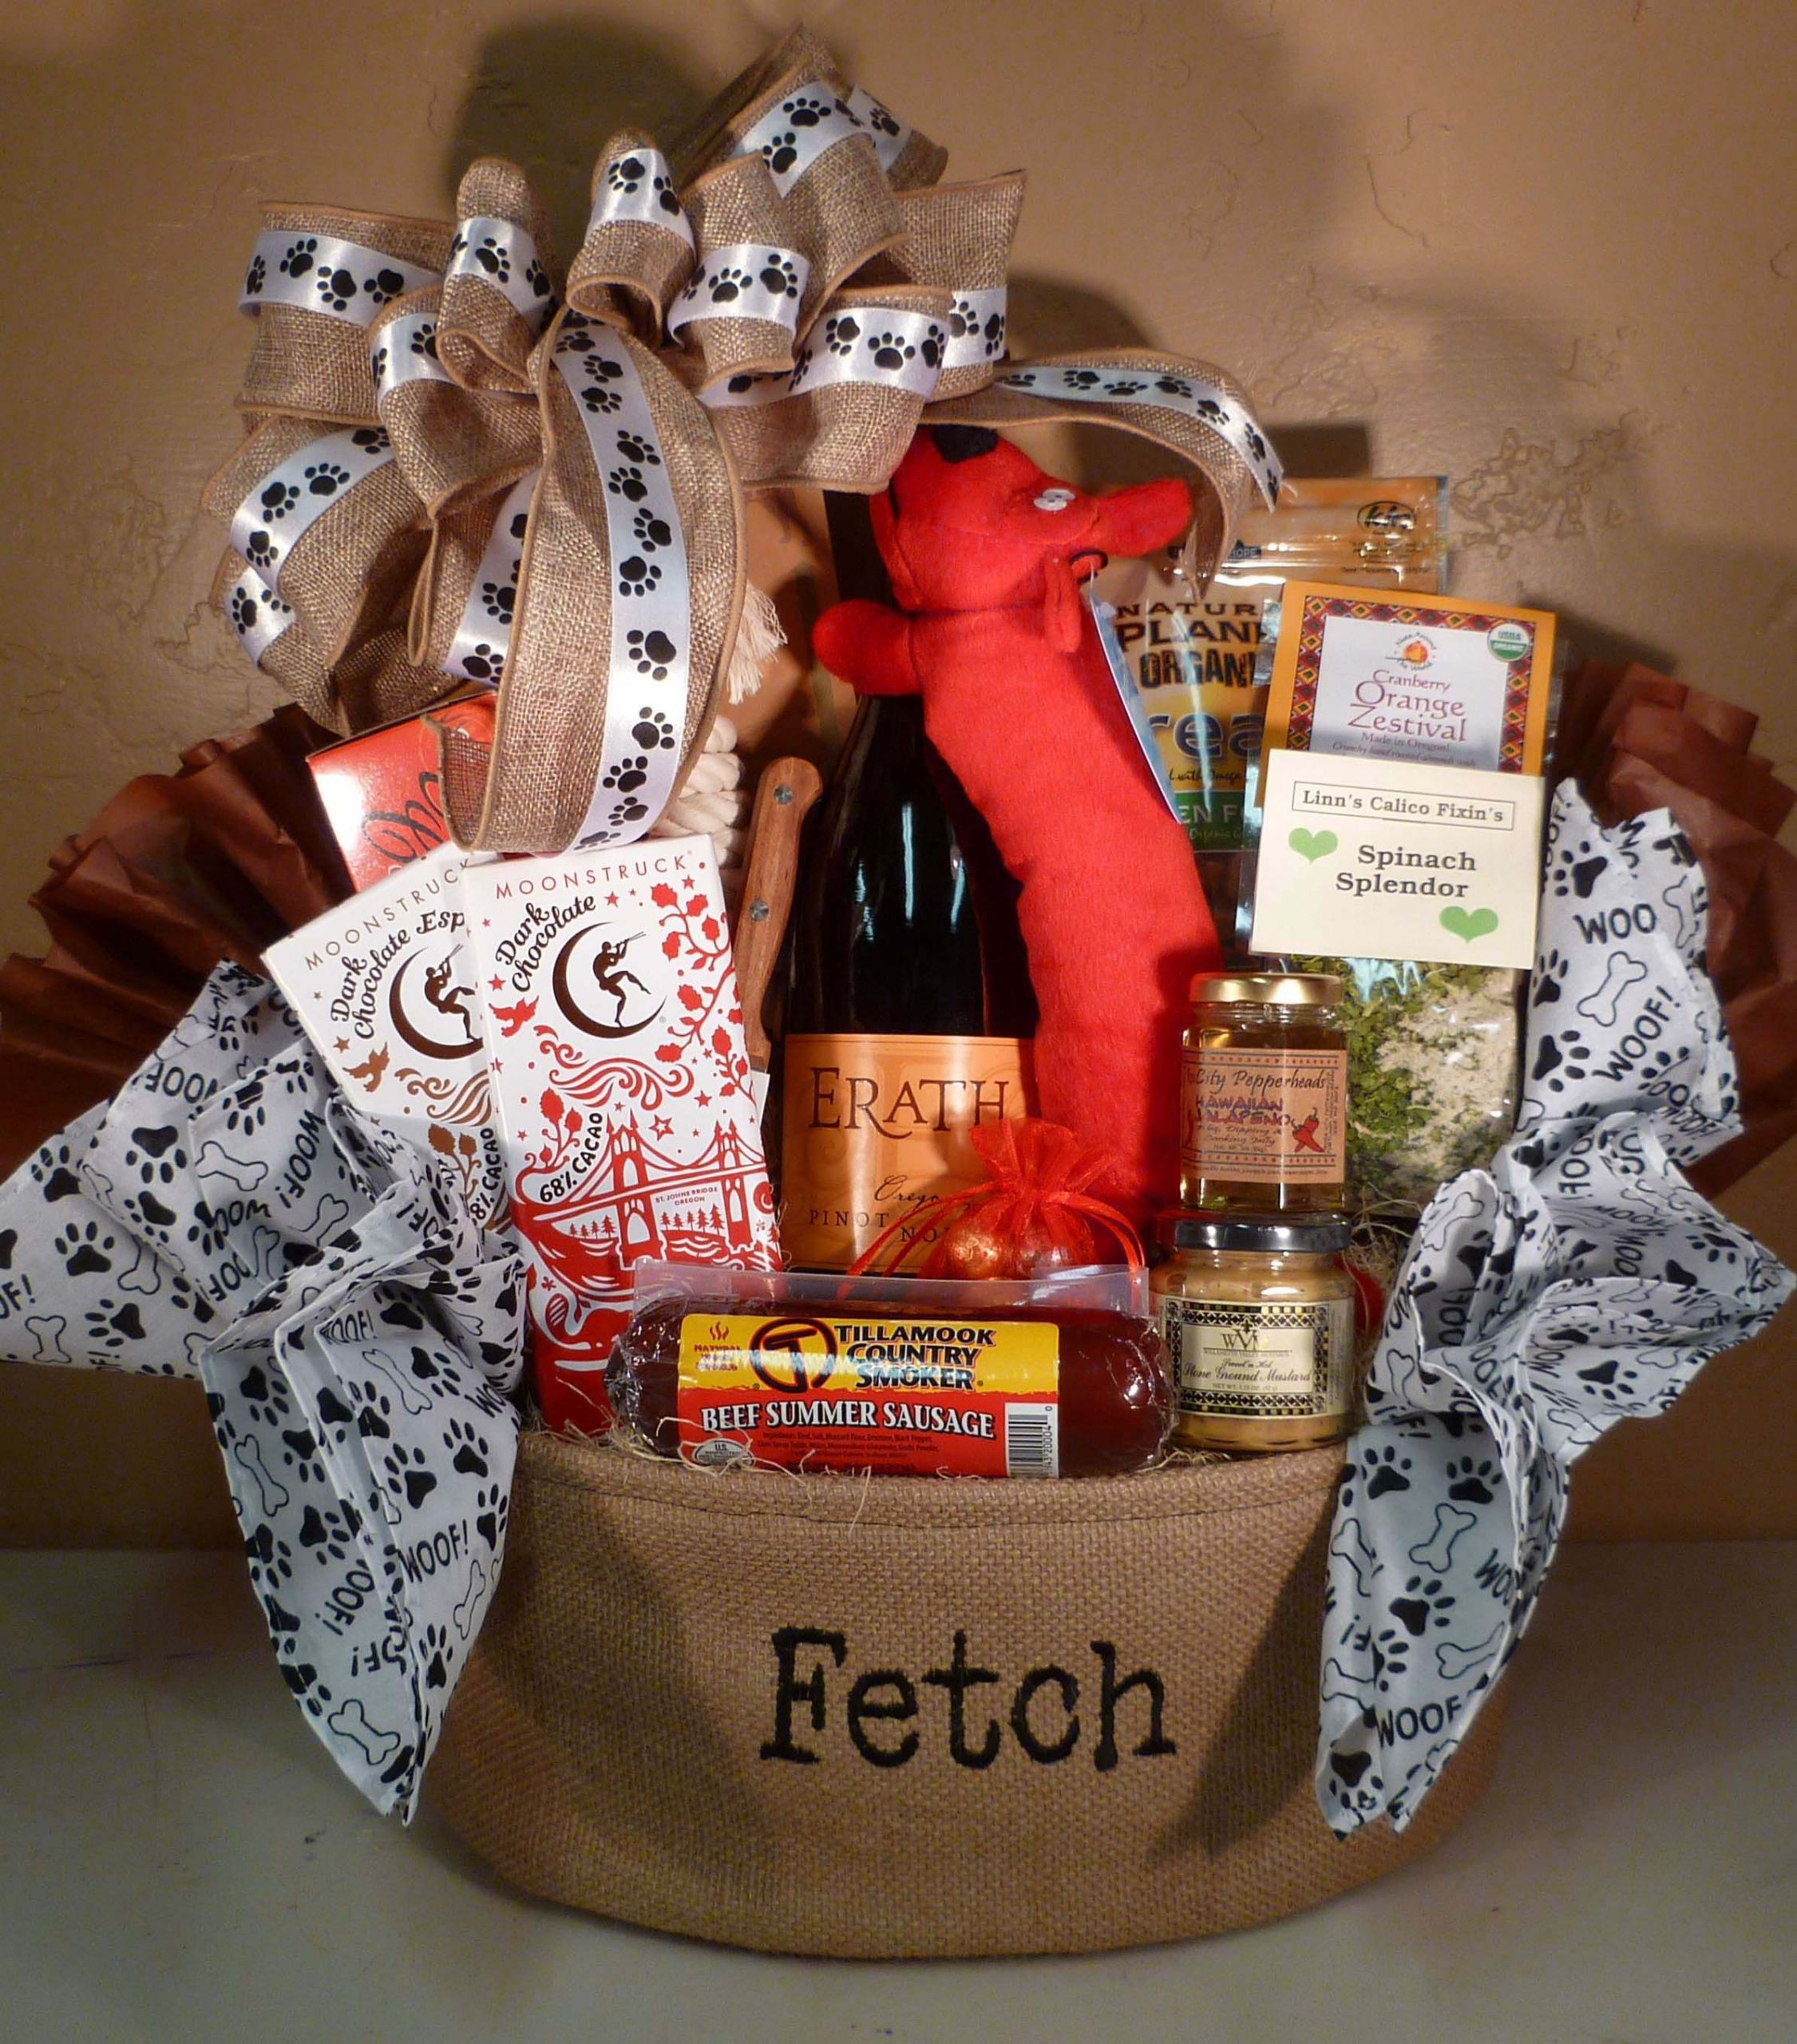 Themed Gift Basket Ideas
 Dog Themed basket for raffle idea mix of treats for